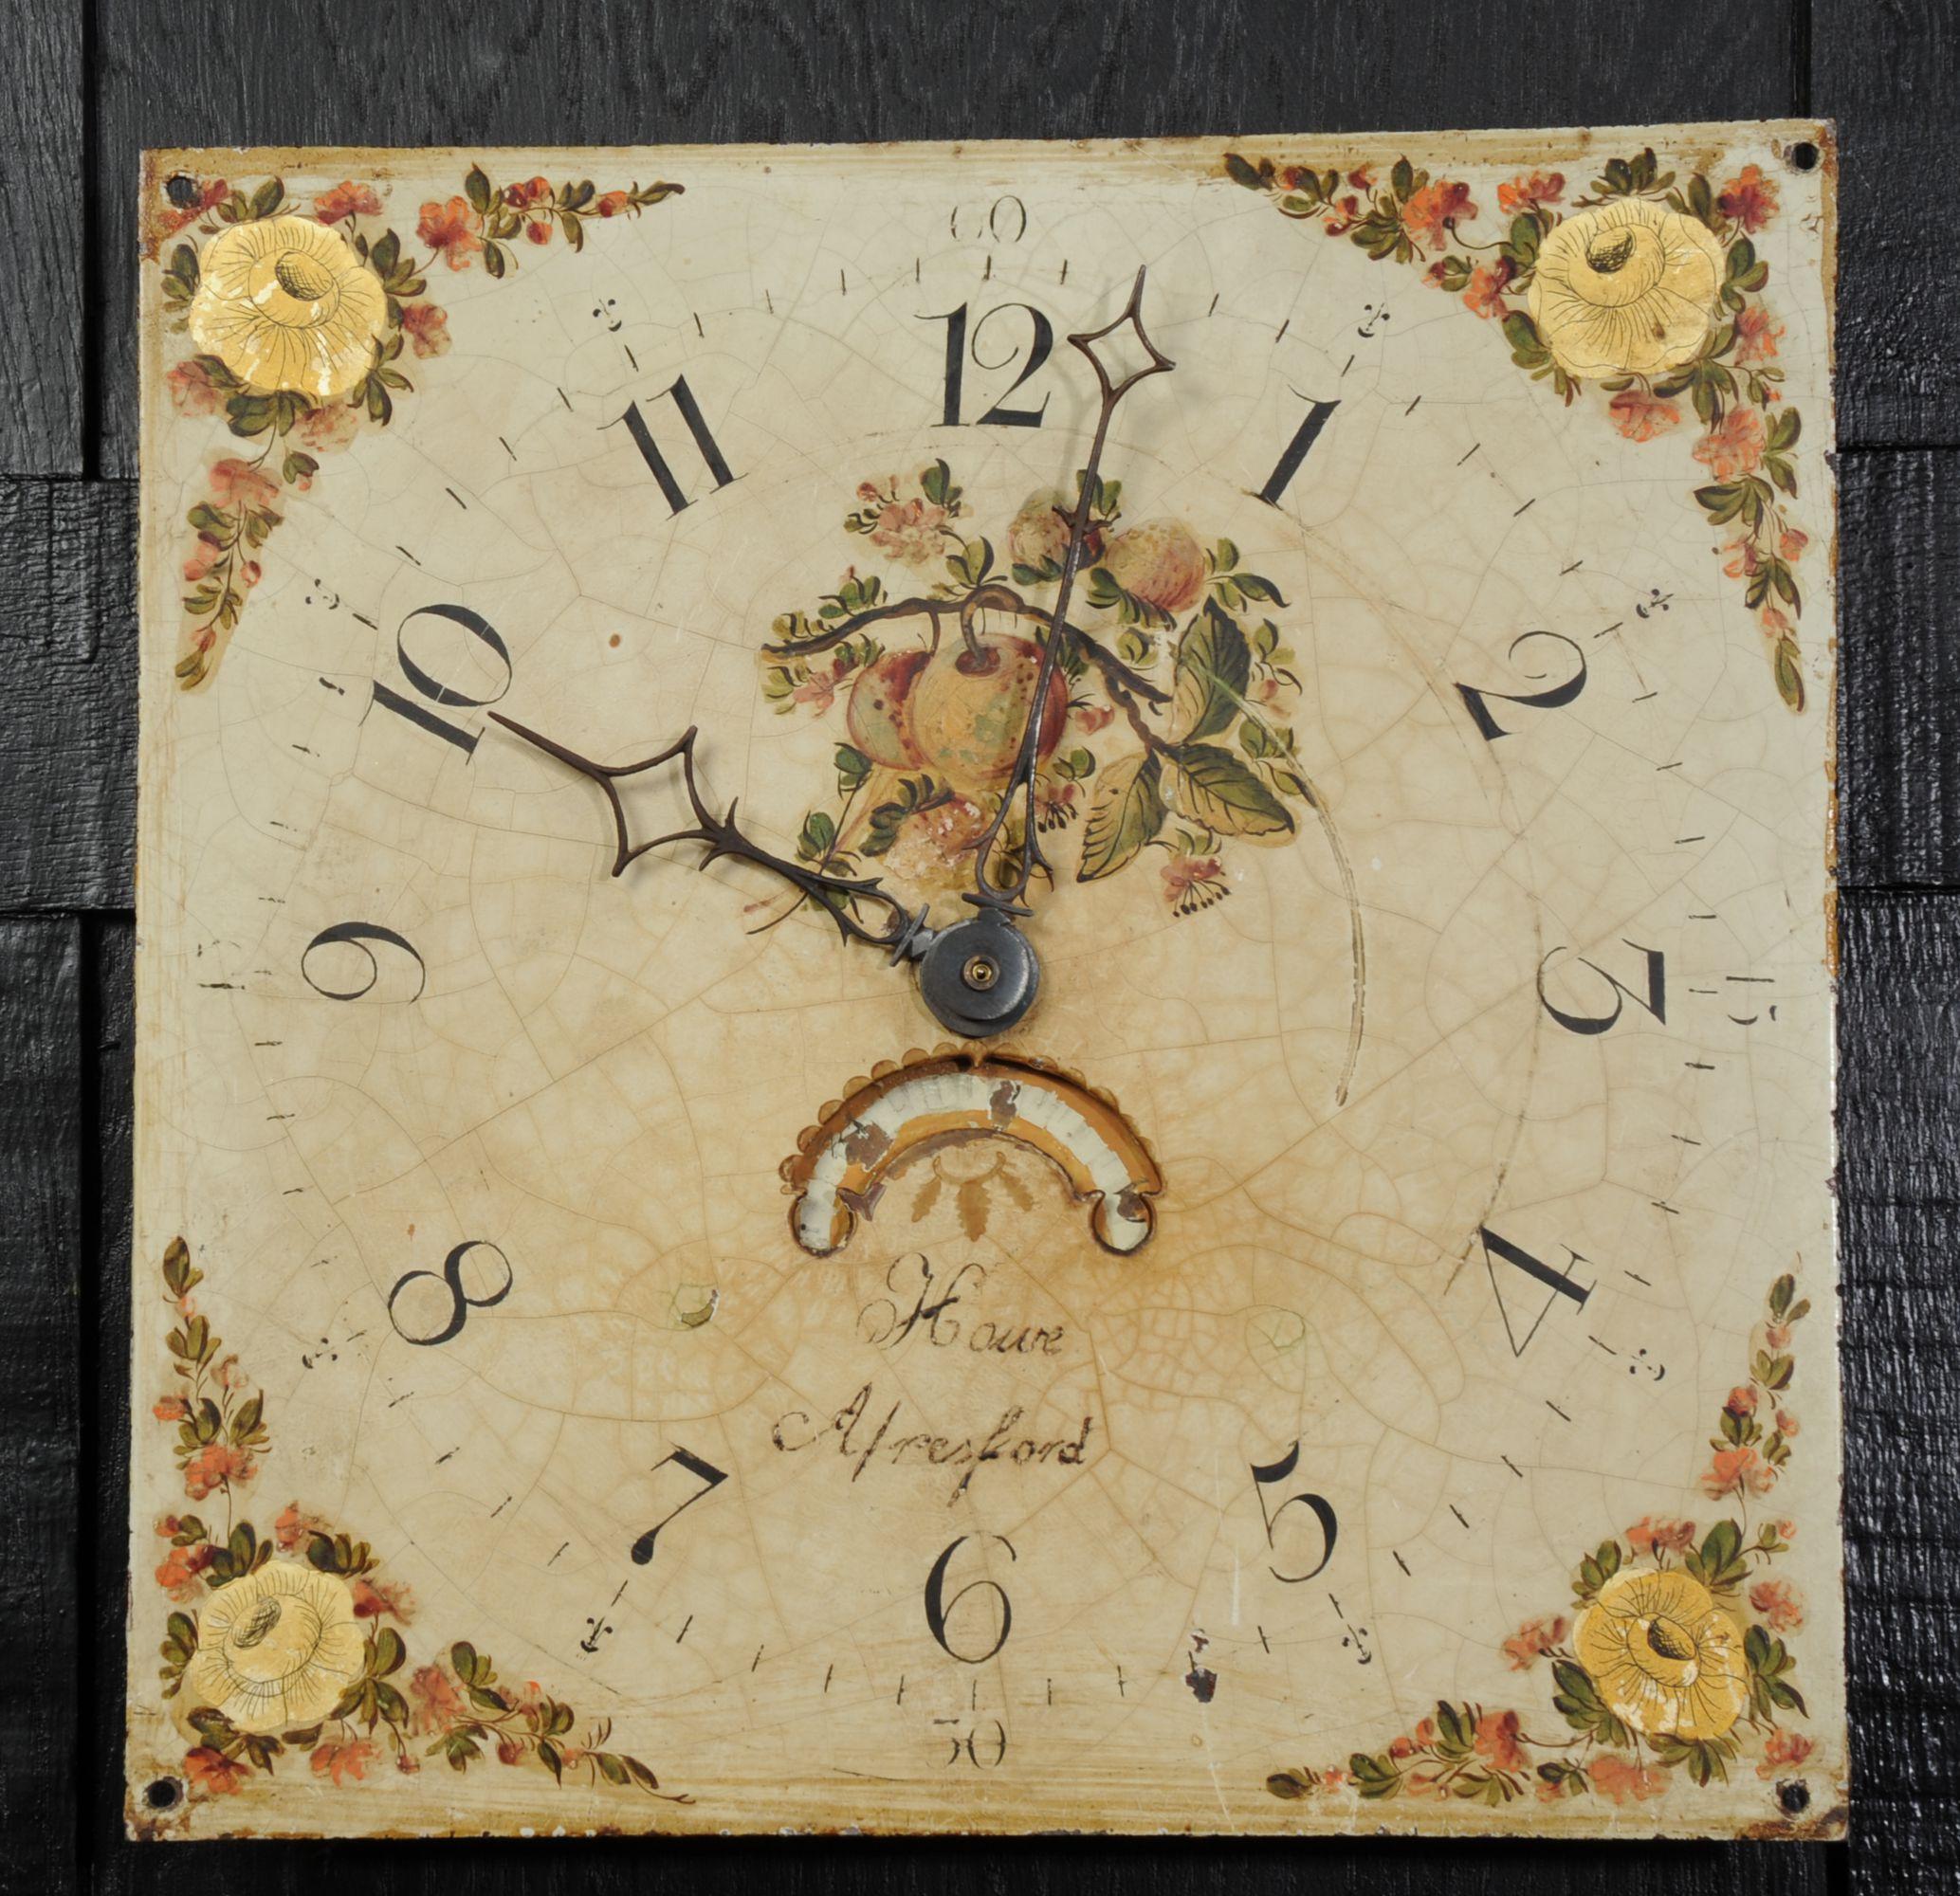 A lovely antique iron clock dial circa 1830 in it's original enamel, charmingly decorated with country garden flowers. With ancient craquelure, marks of a long life and it's original hand cut iron hands, all as found by our buyer on a local estate.